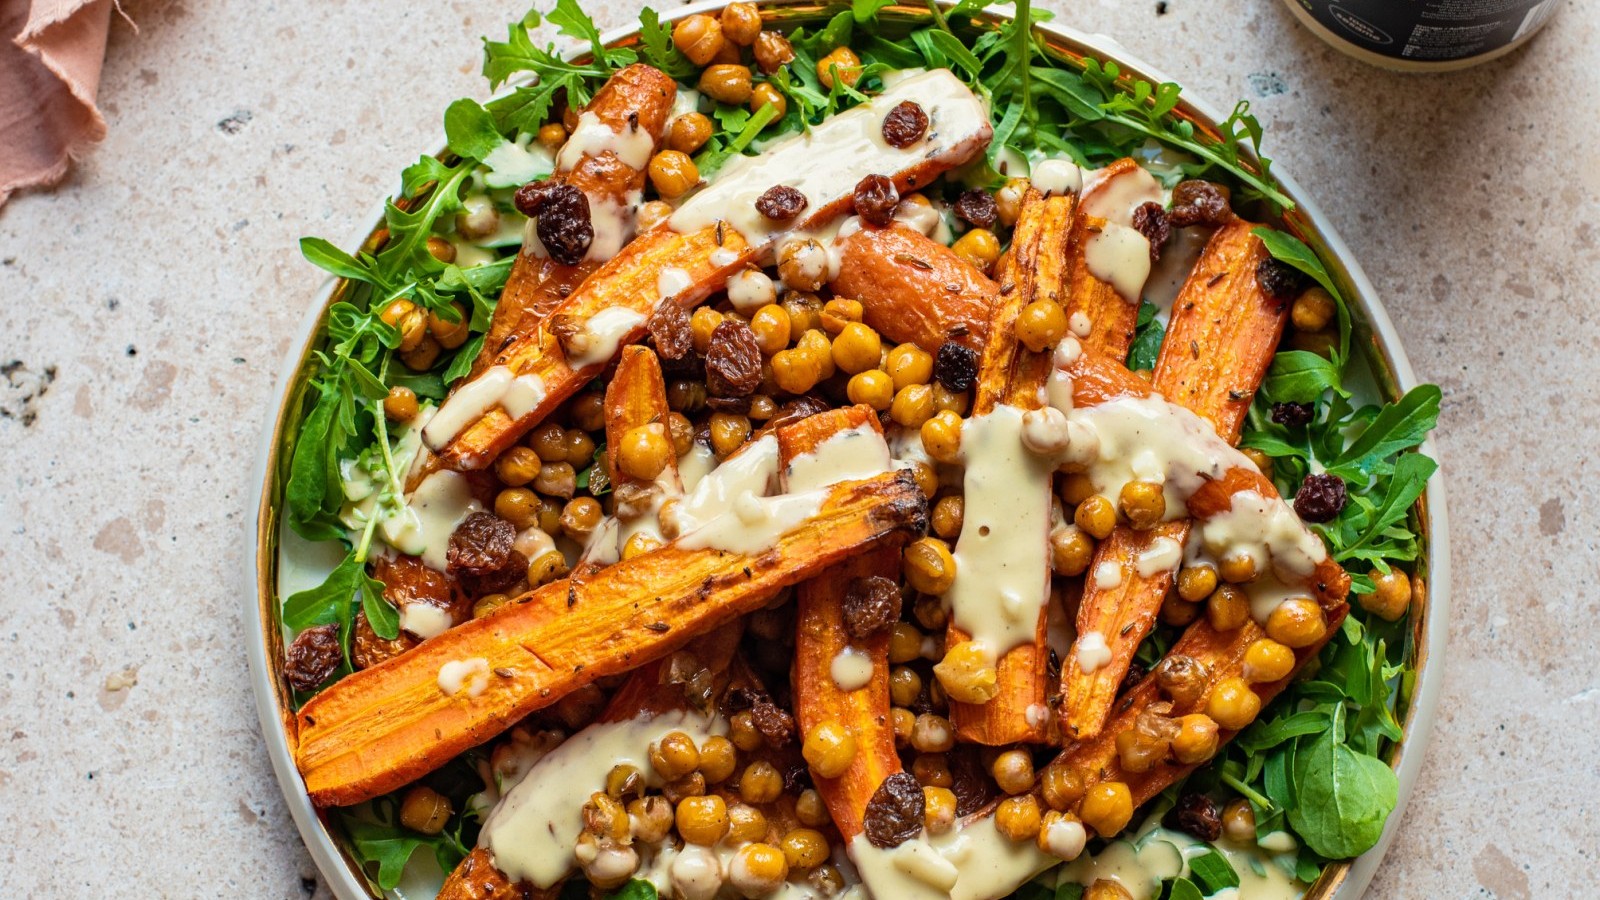 Image of Roasted Carrots, Chickpeas, and Tahini Sauce